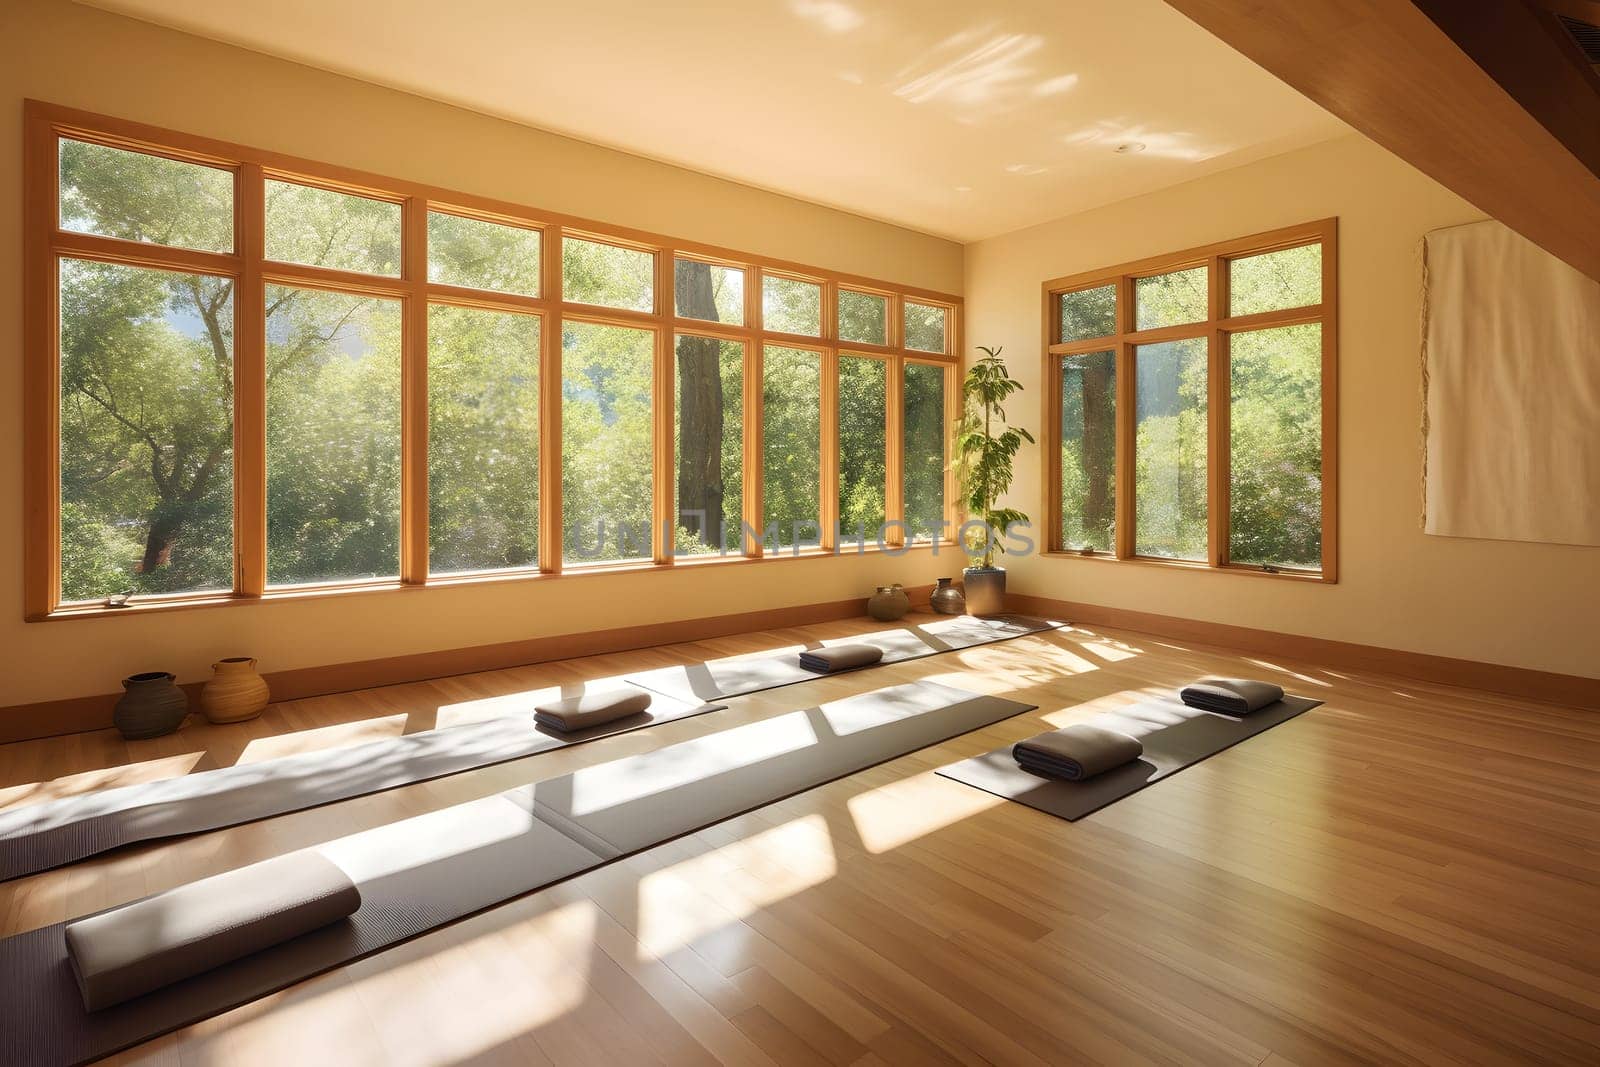 Yoga room with natural light from large windows, neural network generated photorealistic image by z1b